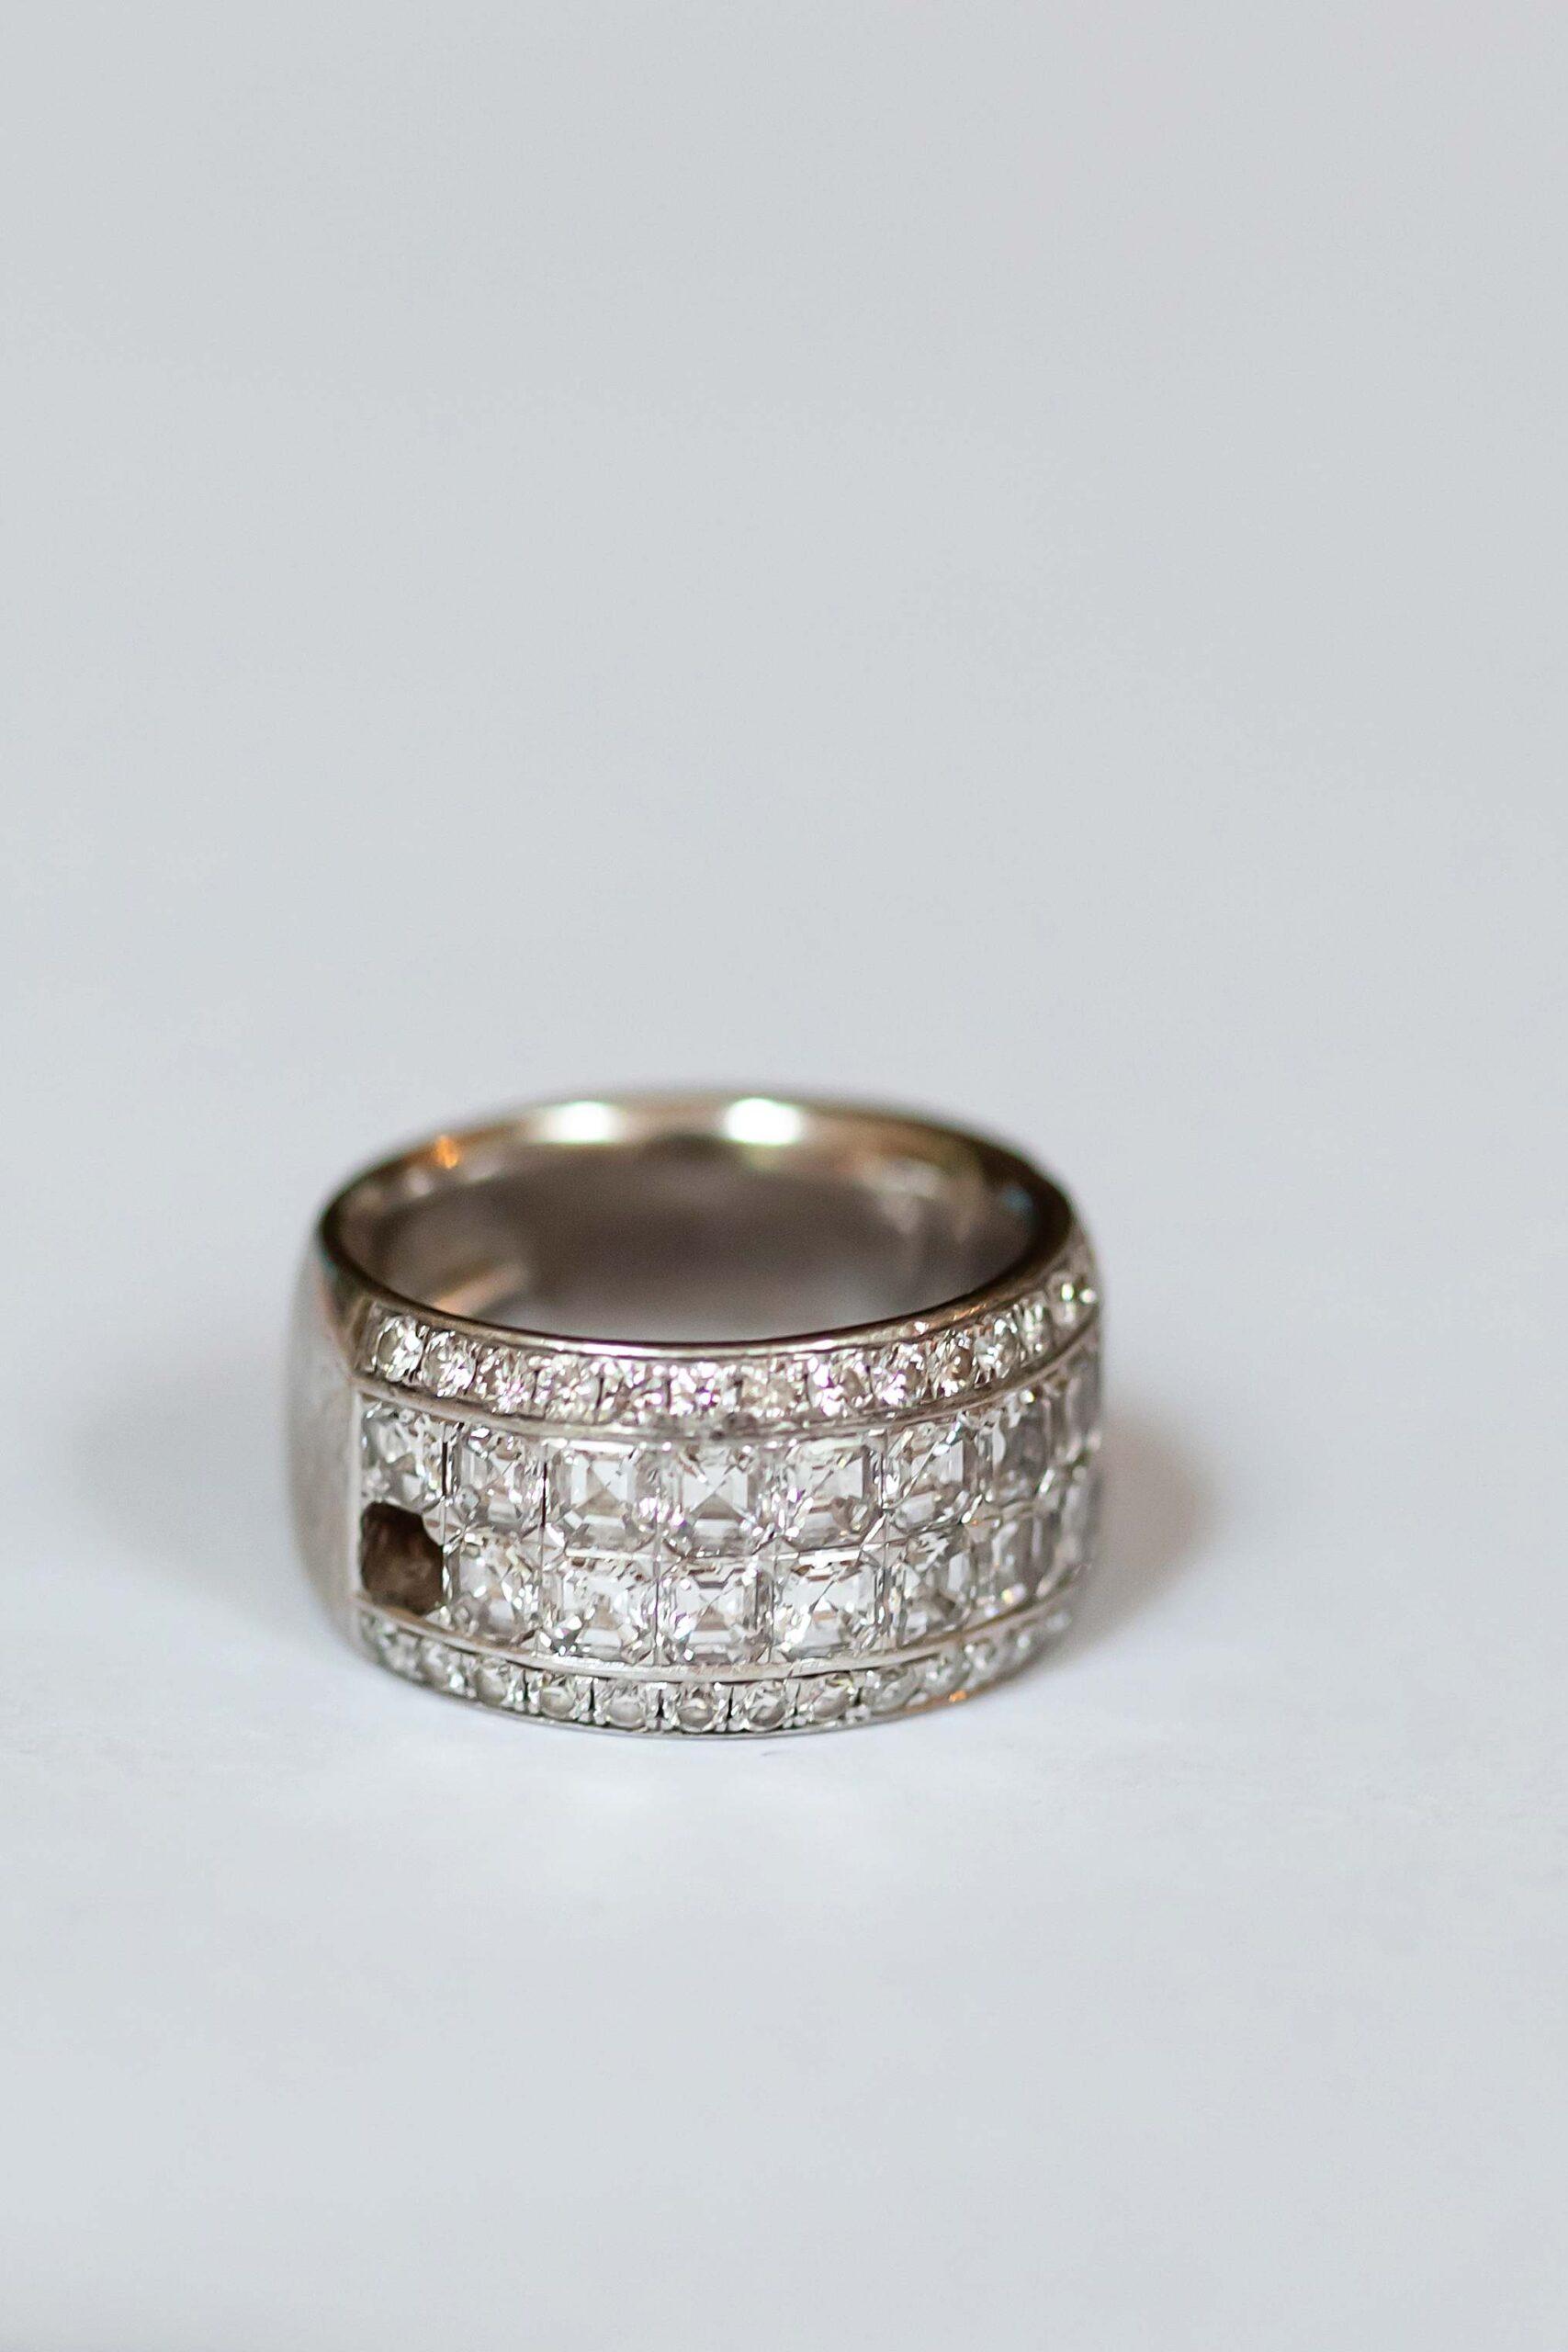 how to find a lost diamond wedding ring